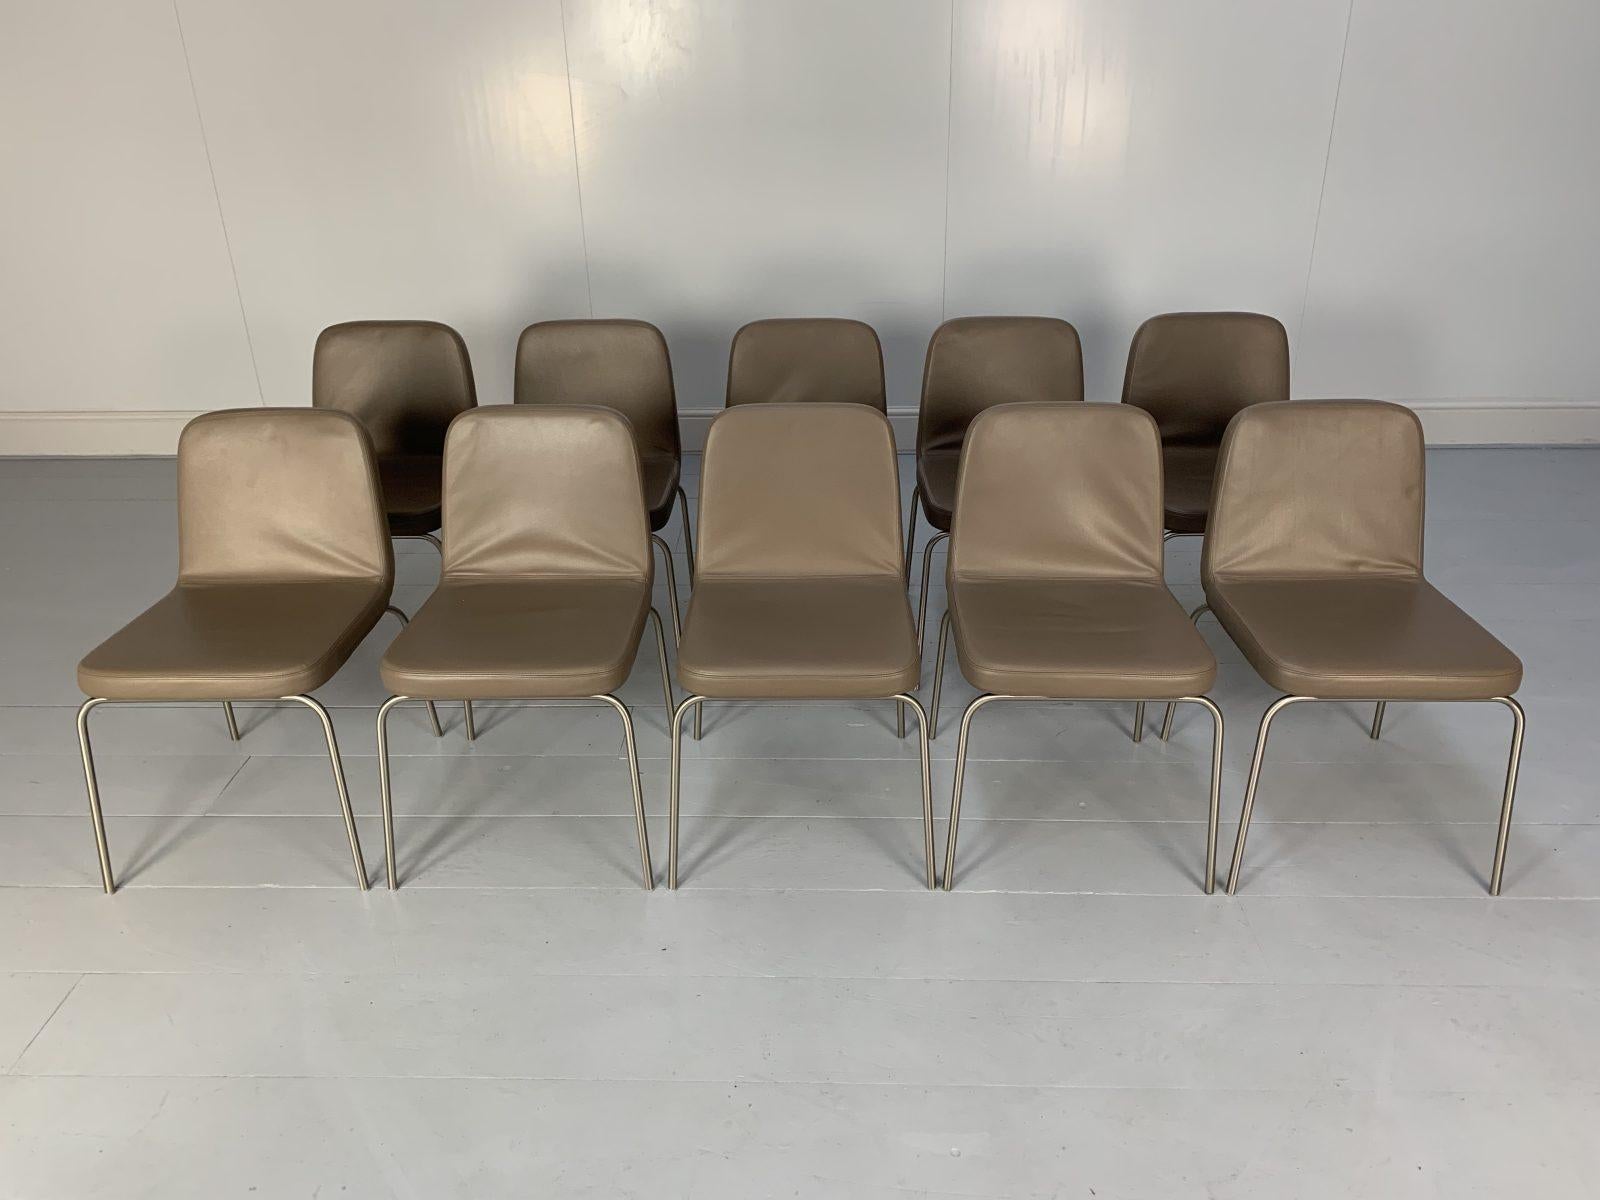 10 Minotti “Arp 1” Dining Chairs, in Taupe Leather In Good Condition For Sale In Barrowford, GB